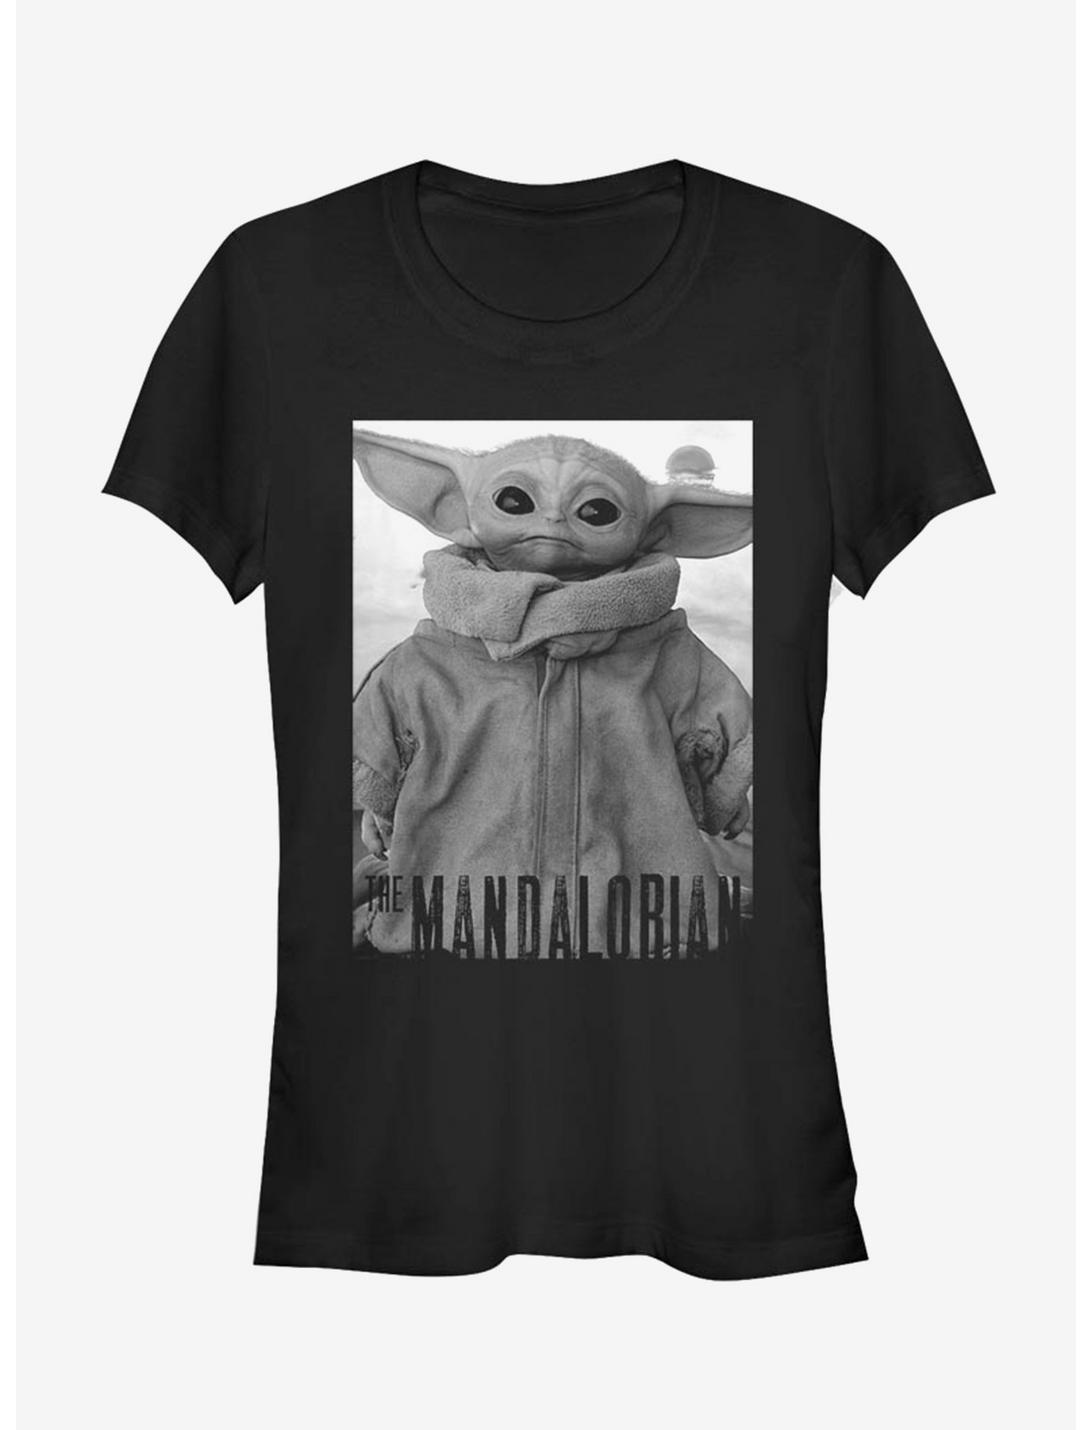 Star Wars The Mandalorian The Child Only One Girls T-Shirt, BLACK, hi-res